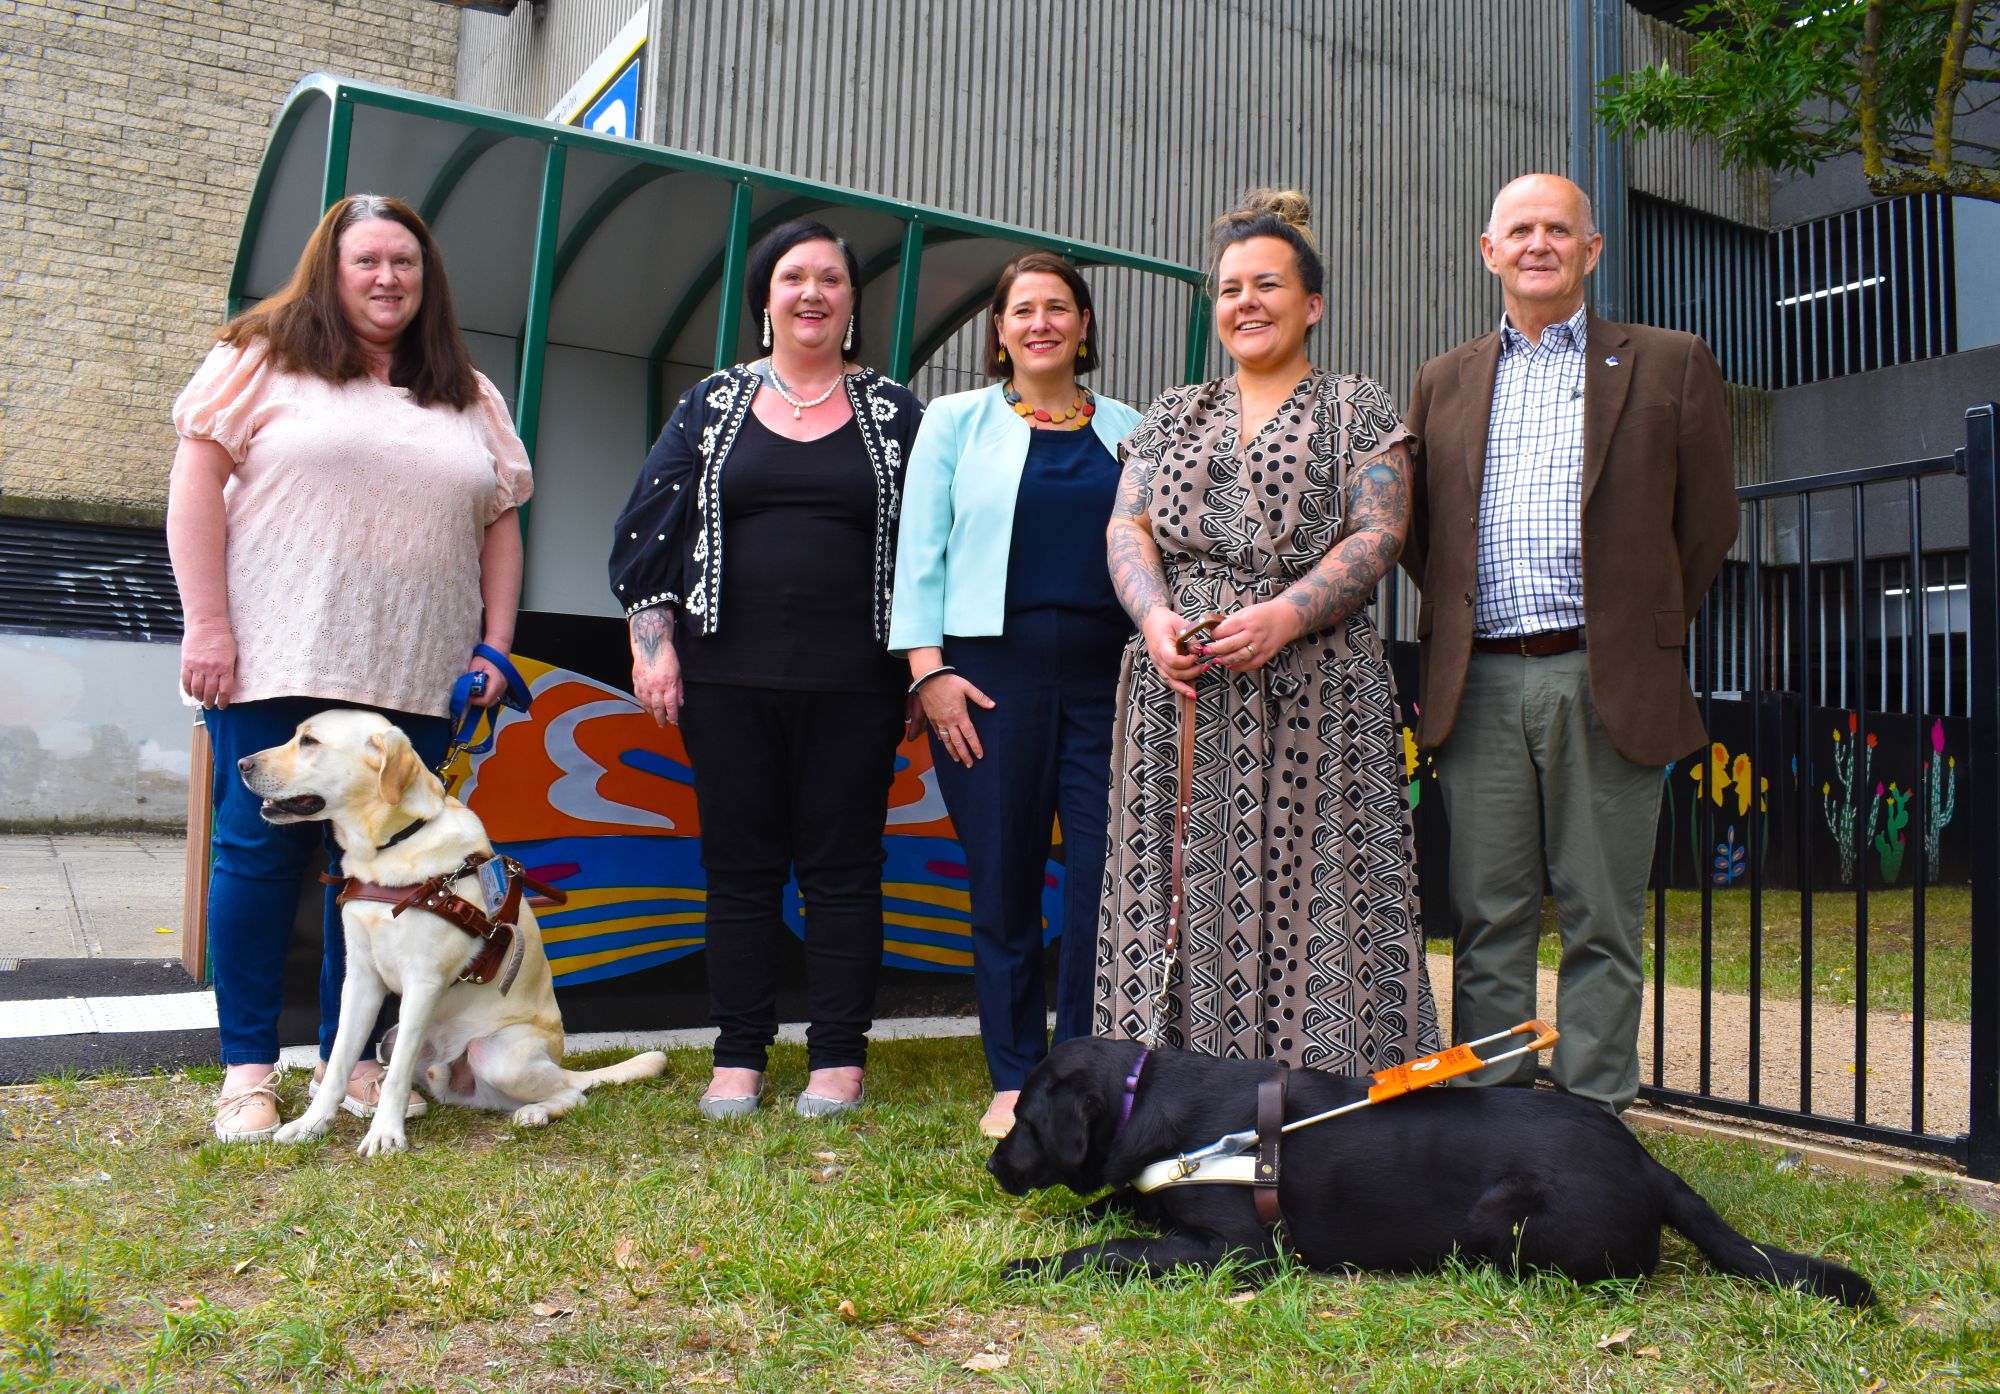 Four women and one man stand in front of a shelter and fenced area, with two assistance dogs. Perf